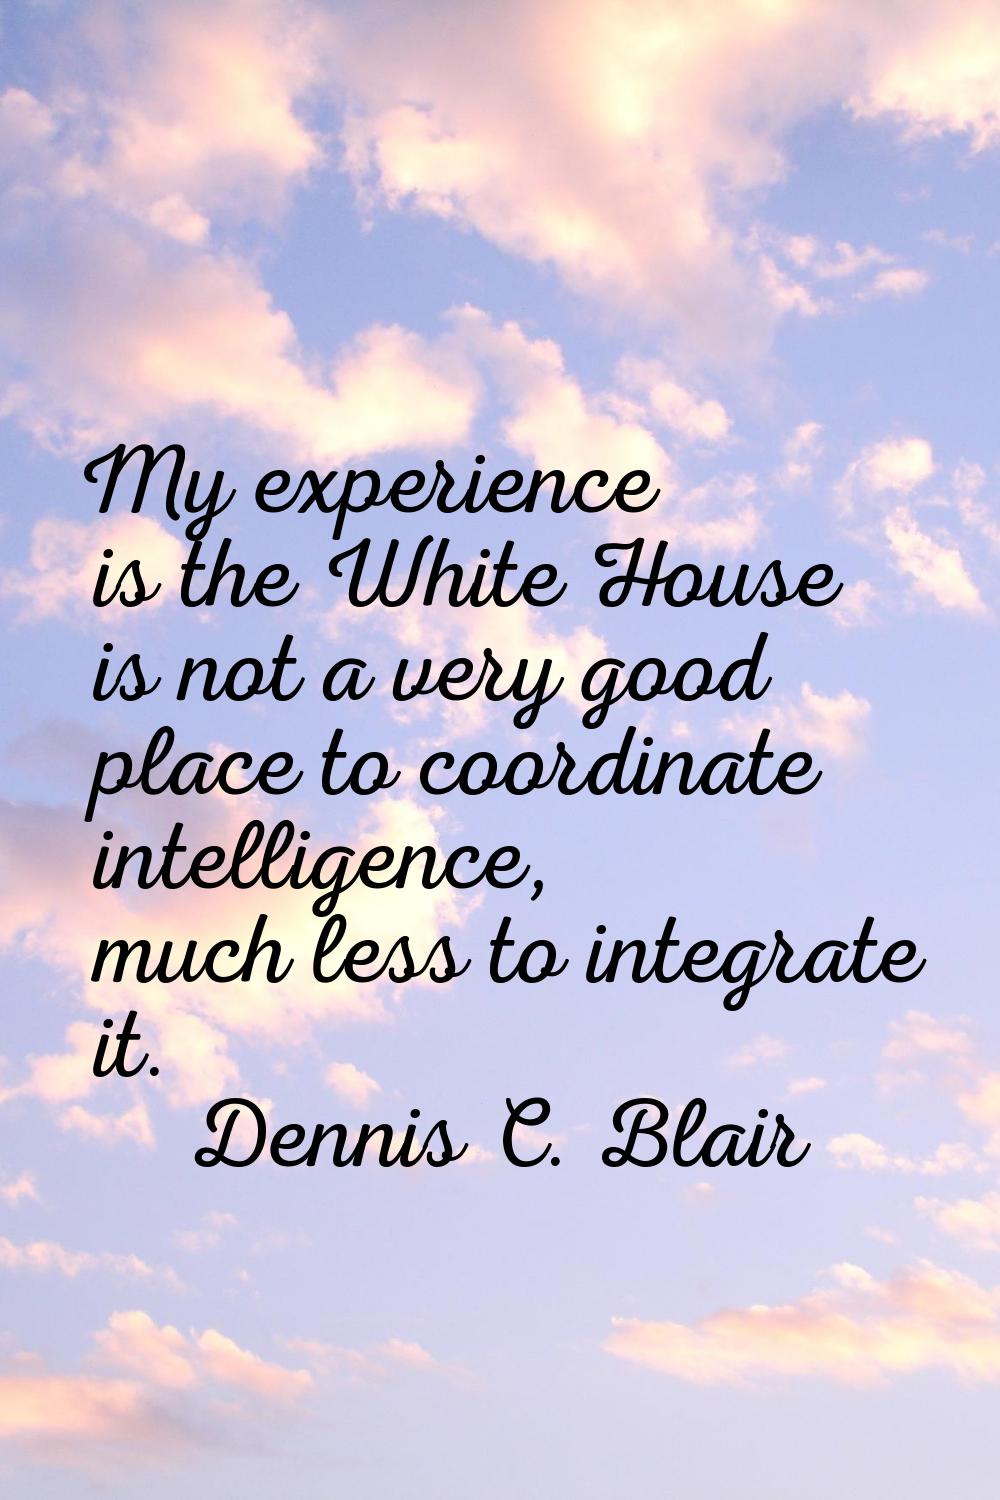 My experience is the White House is not a very good place to coordinate intelligence, much less to 